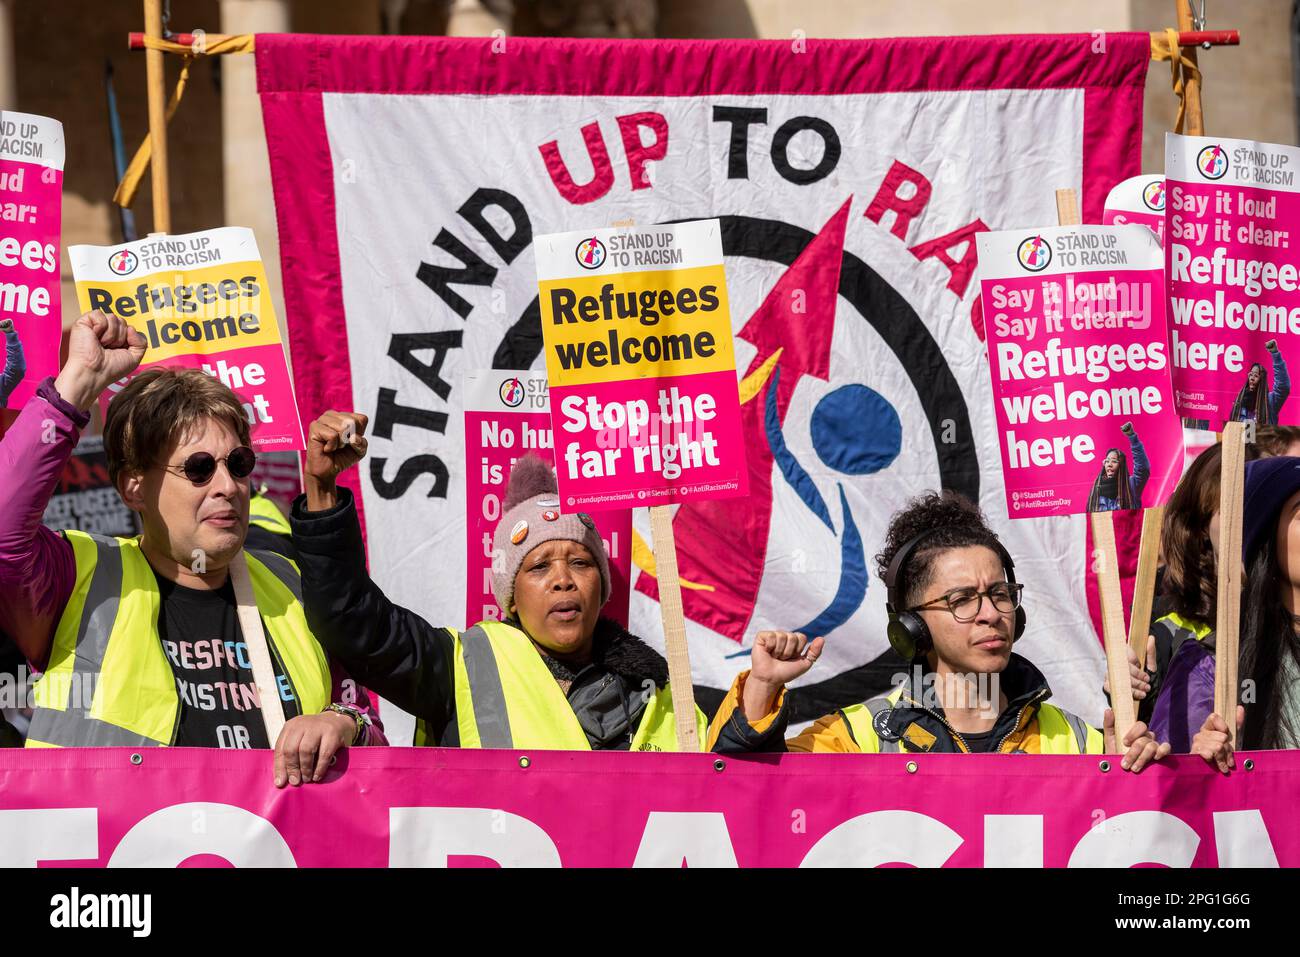 Protest taking place in London on UN Anti Racism Day. Stand up to Racism. Refugees welcome, stop the far right placard. Protesters Stock Photo